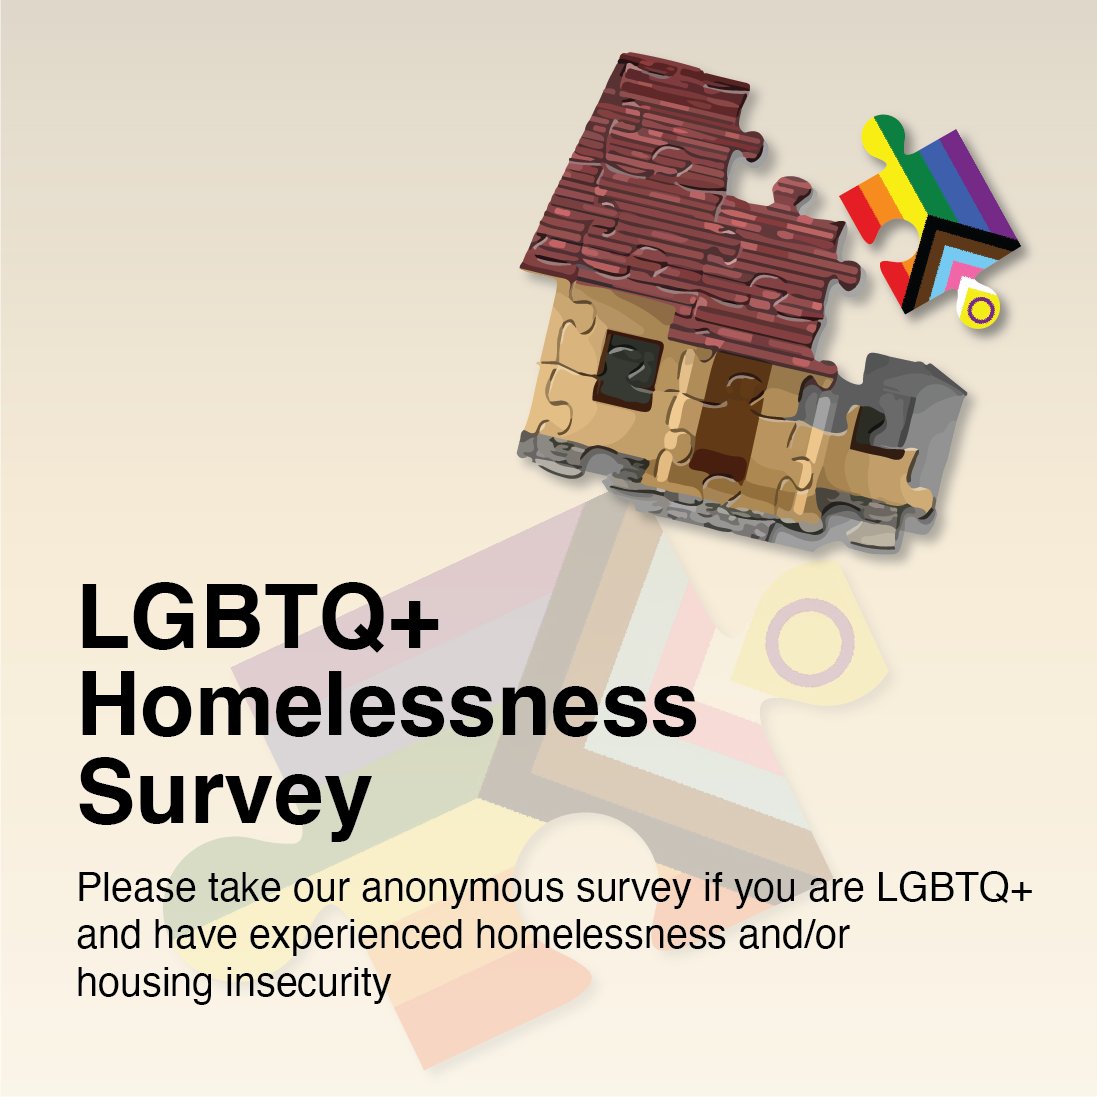 LGBTQ+ people facing homelessness and housing insecurity in Ireland are invited to take part in a new @Outhouse_Dublin survey to inform plans for dedicated emergency accommodation. Find out more here 👉surveymonkey.com/r/LGBTQhome24